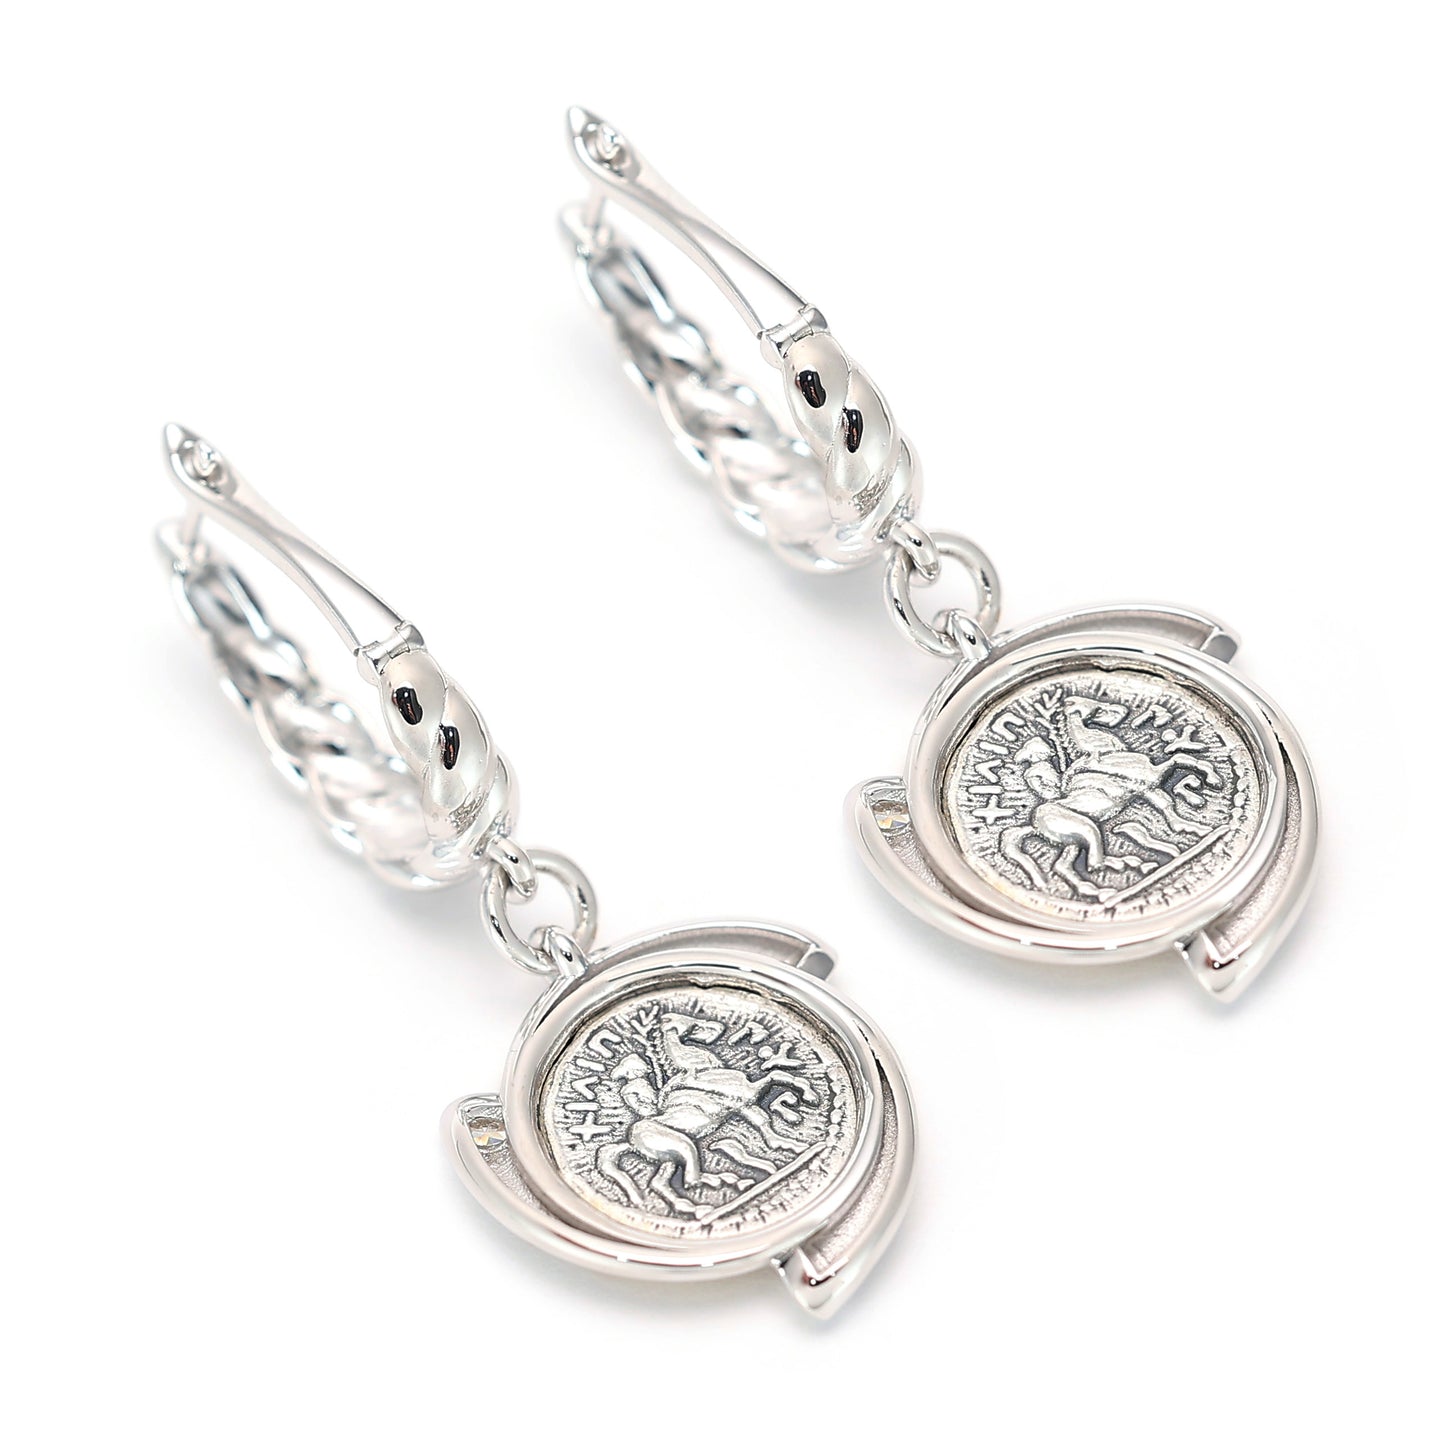 Micro-setting two-sided ancient coin the king of the gods Zeus earrings, sterling silver